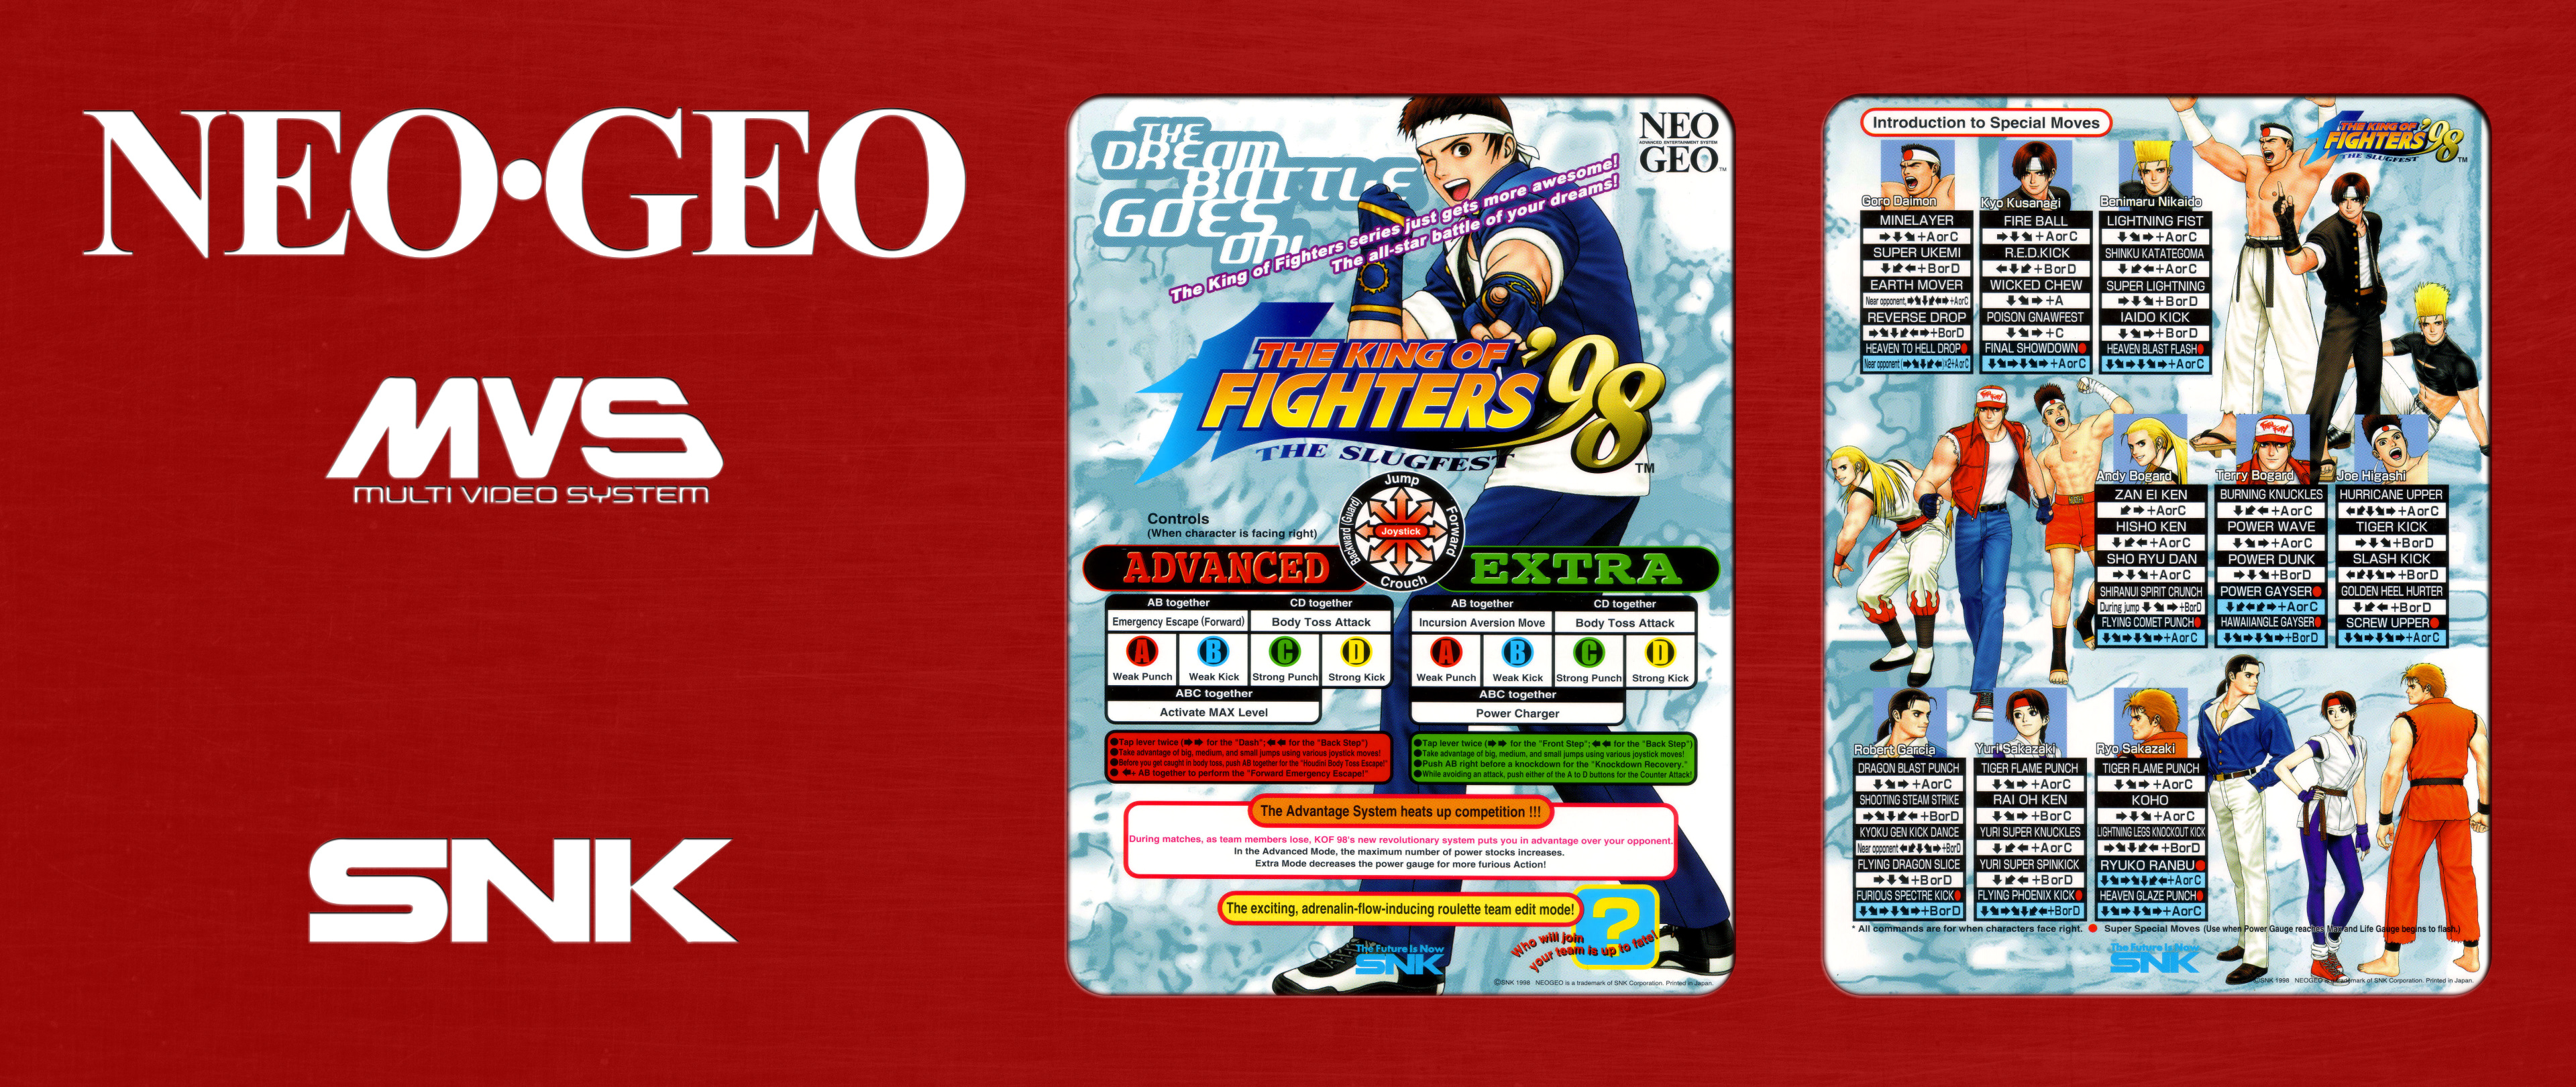 The King of Fighters '98: The Slugfest box covers - MobyGames